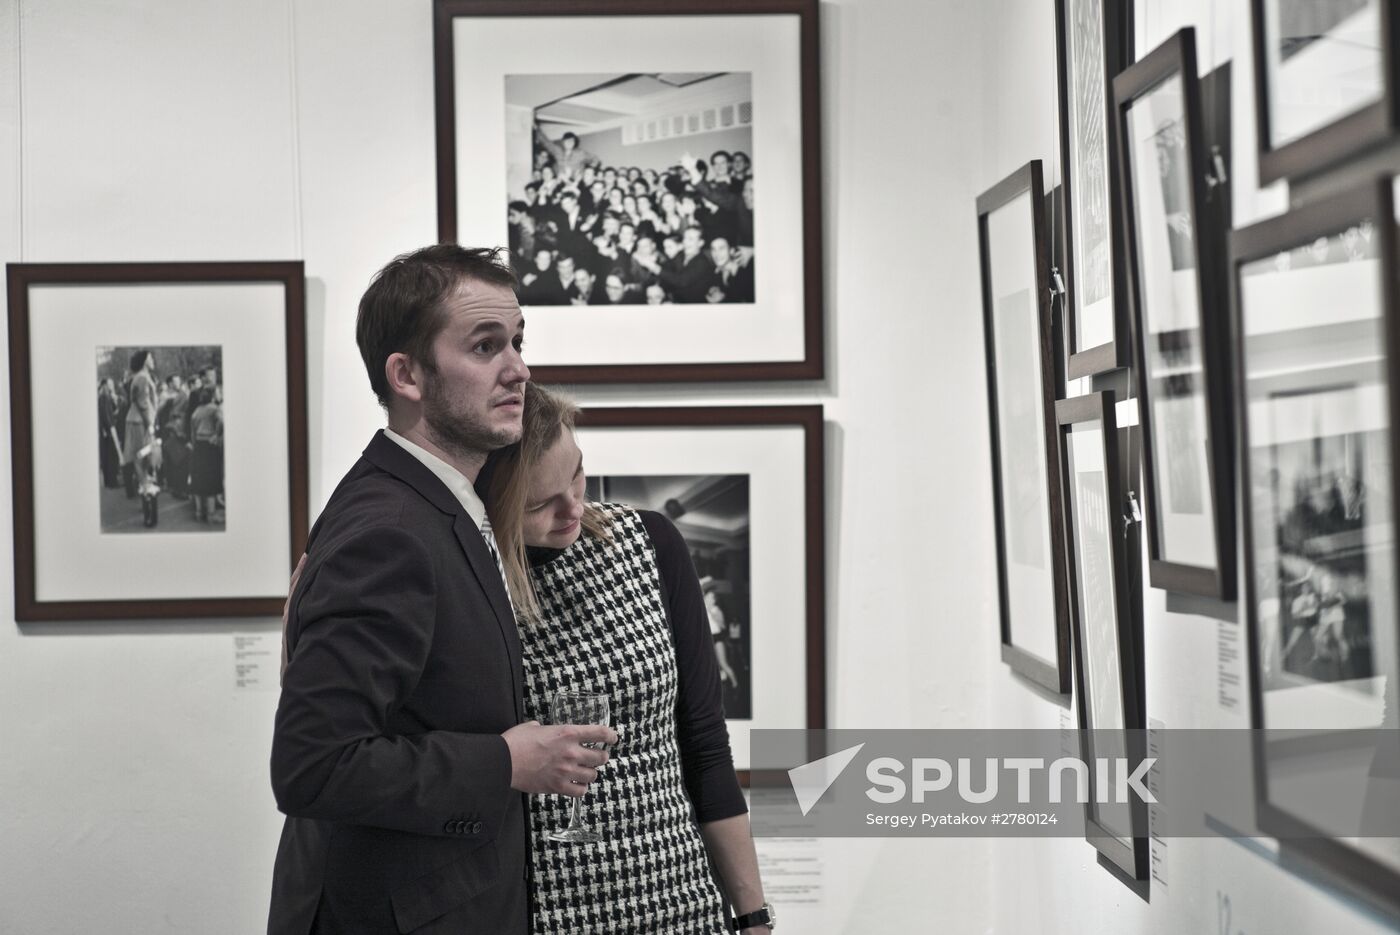 "Gaudeamus: History of Russian Studentship" exhibition opens in Moscow